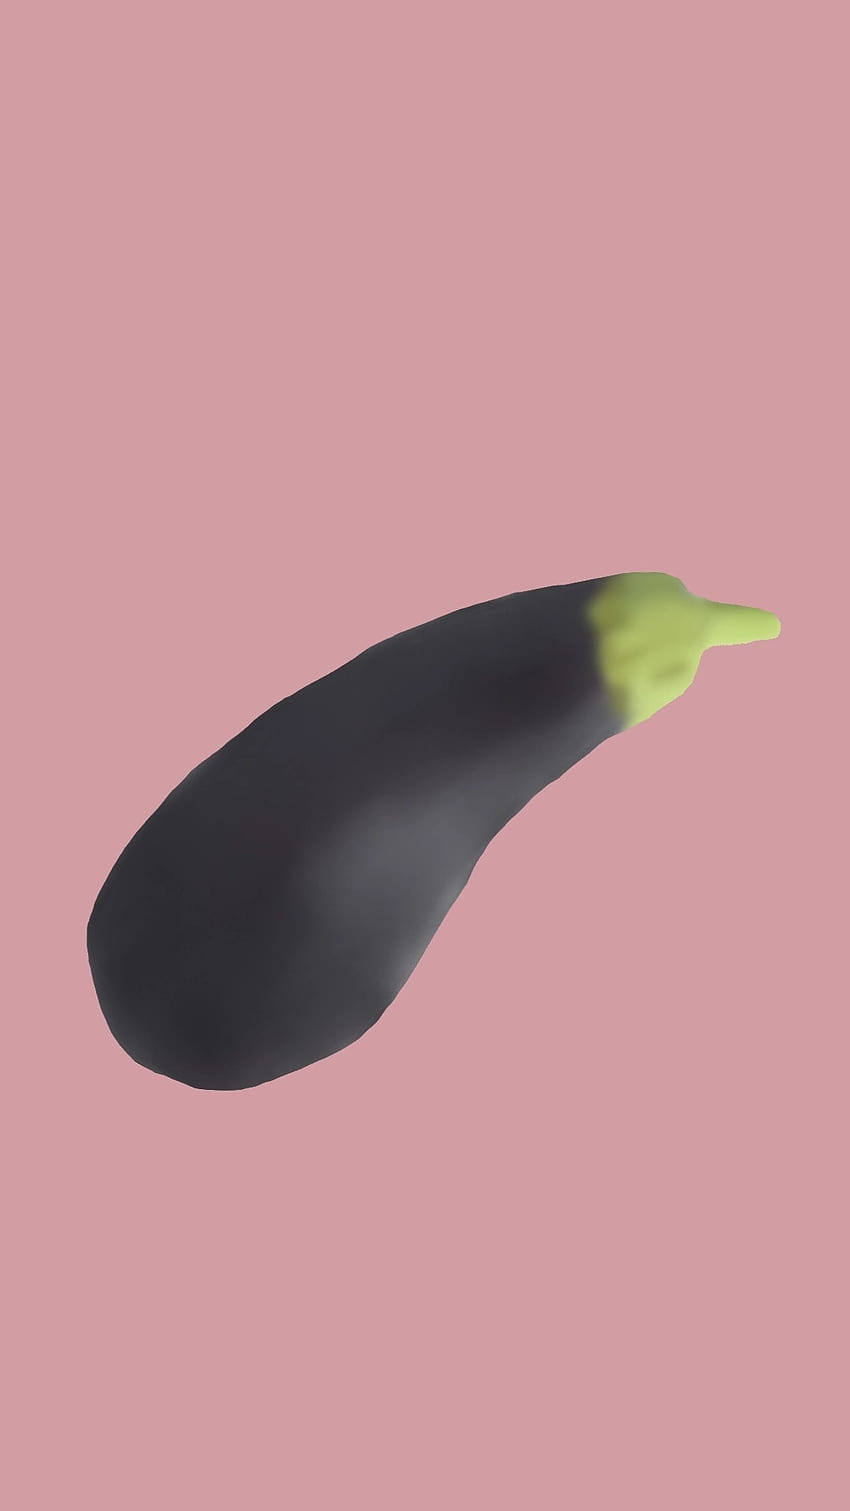 I will post this drawing of an eggplant everyday until it's ft in a reddit video or he eats an eggplant: JackSucksAtLife, aesthetic eggplant HD phone wallpaper